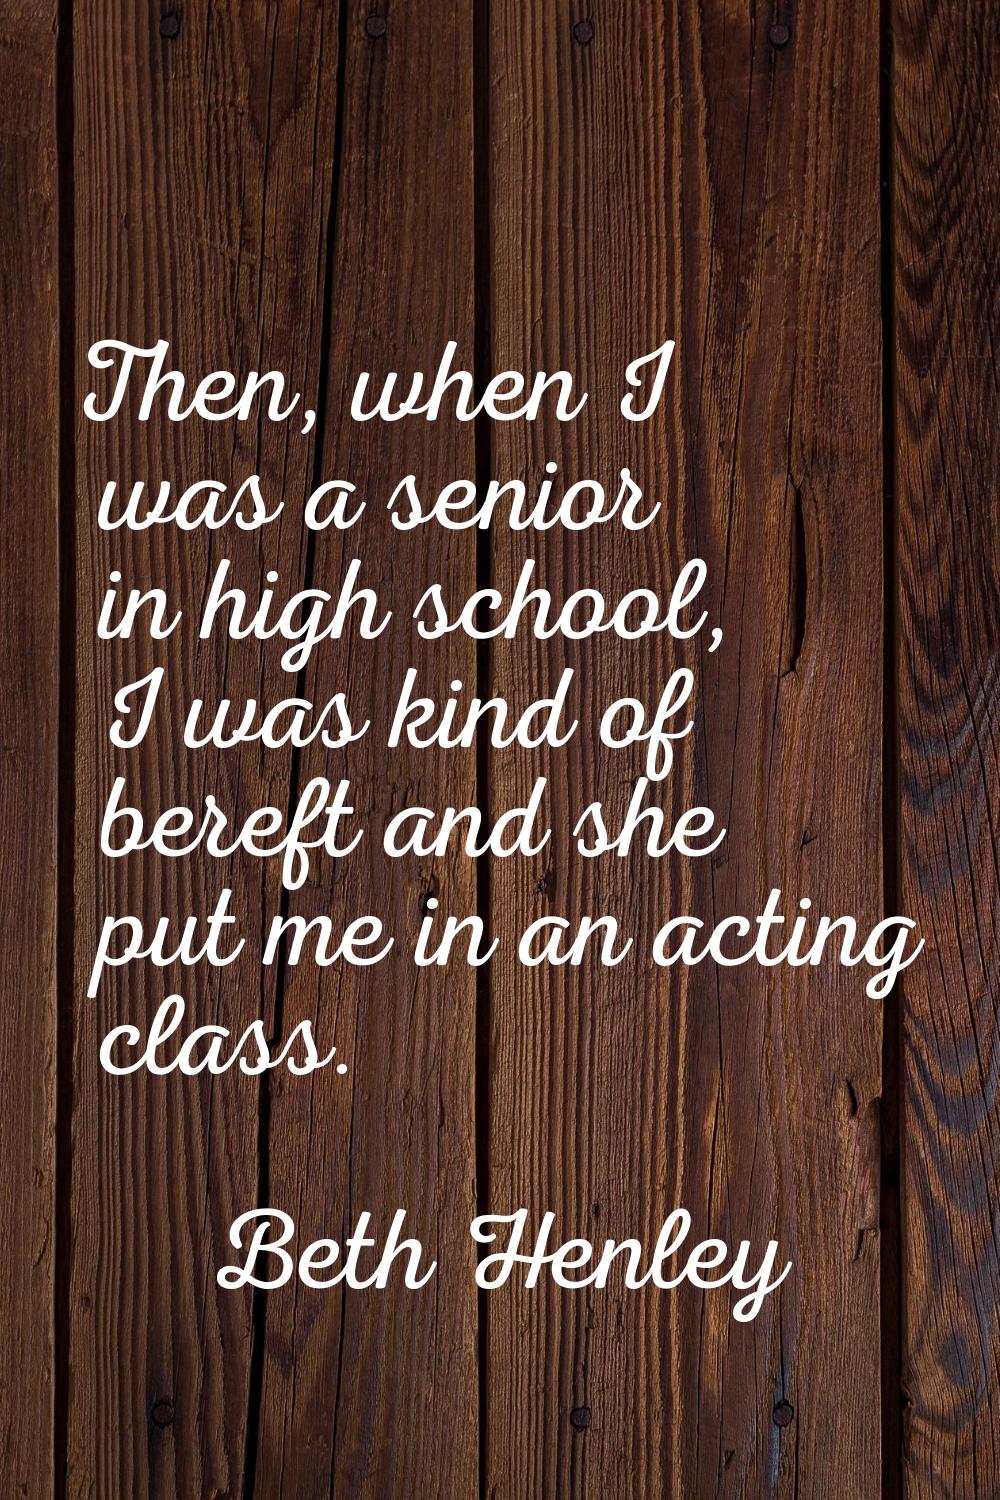 Then, when I was a senior in high school, I was kind of bereft and she put me in an acting class.